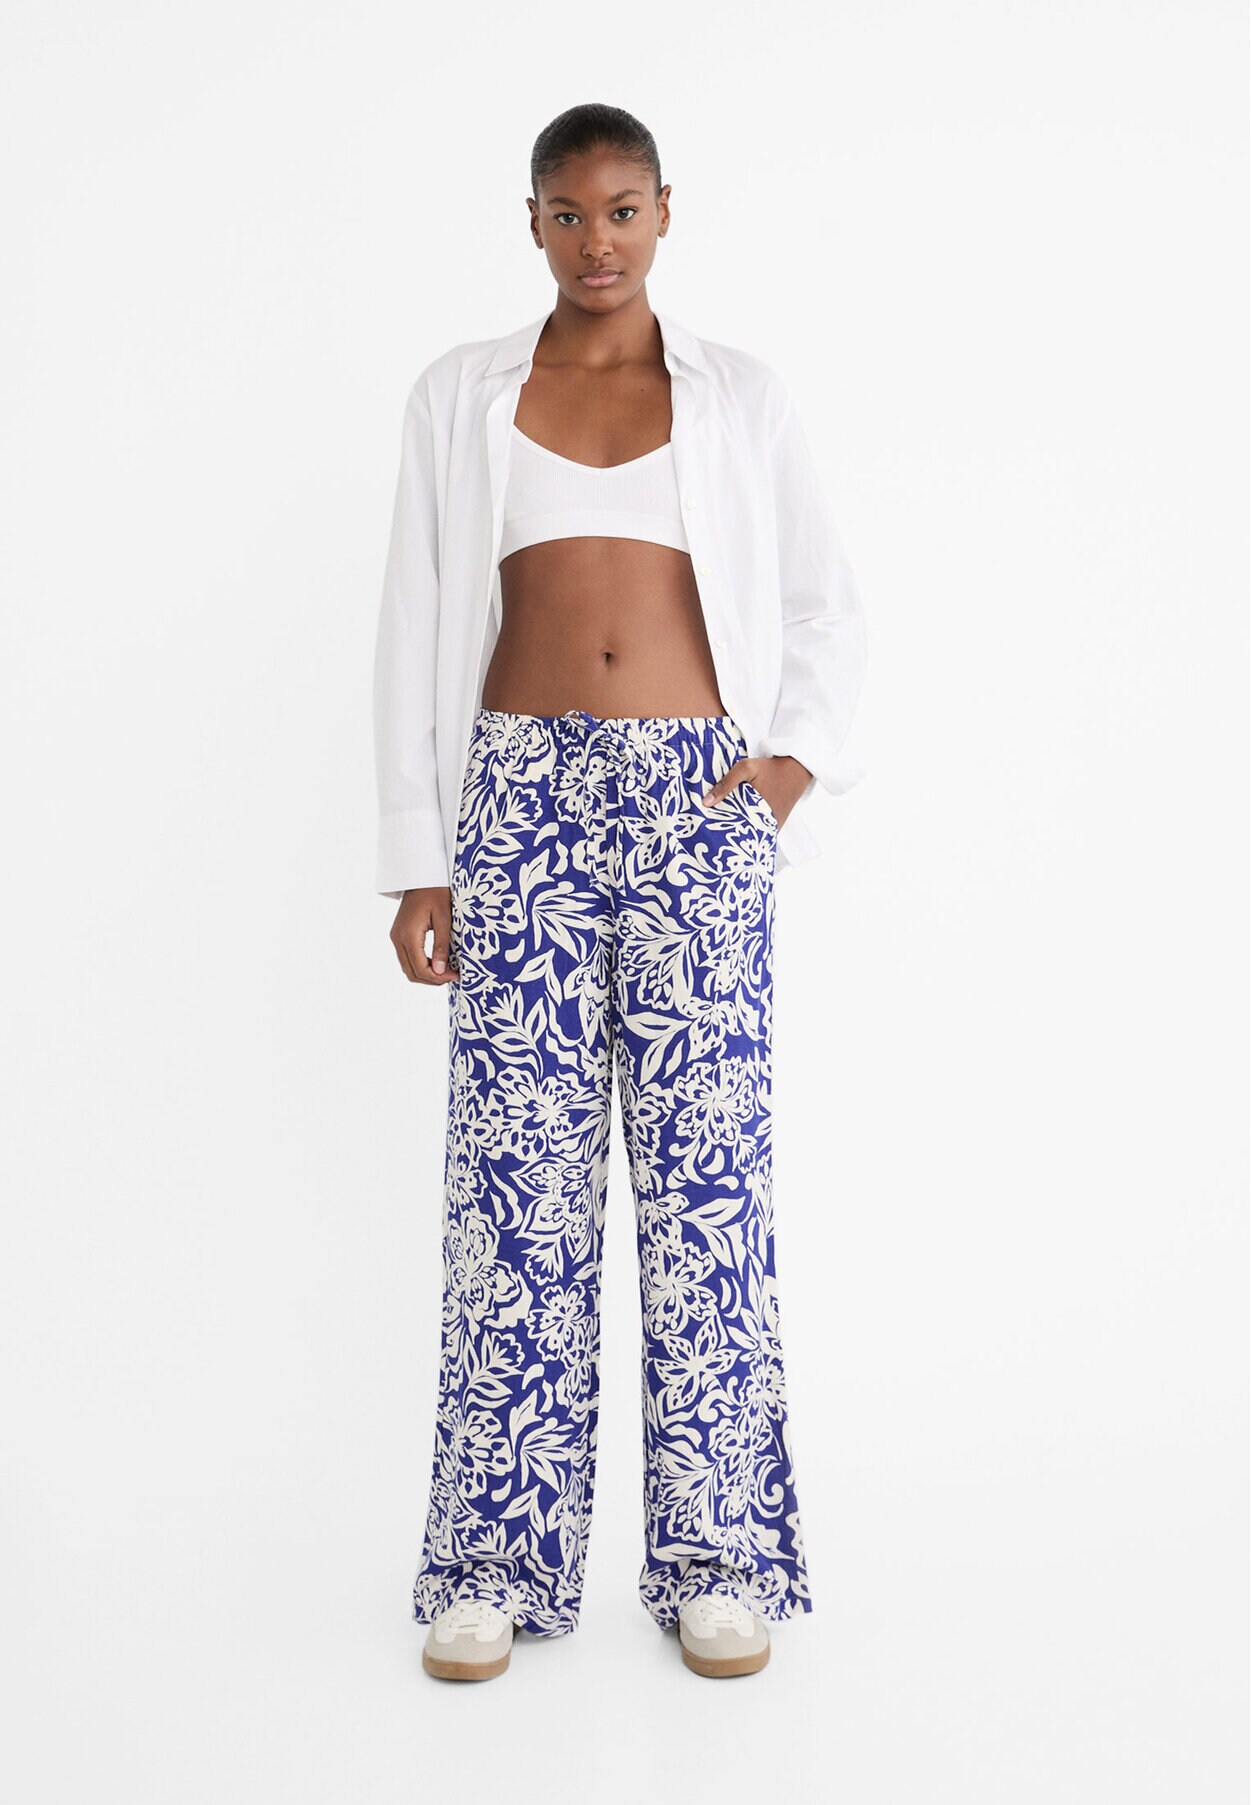 WMNS Loose Fitting Gym Pants - Elastic Waistband / Printed